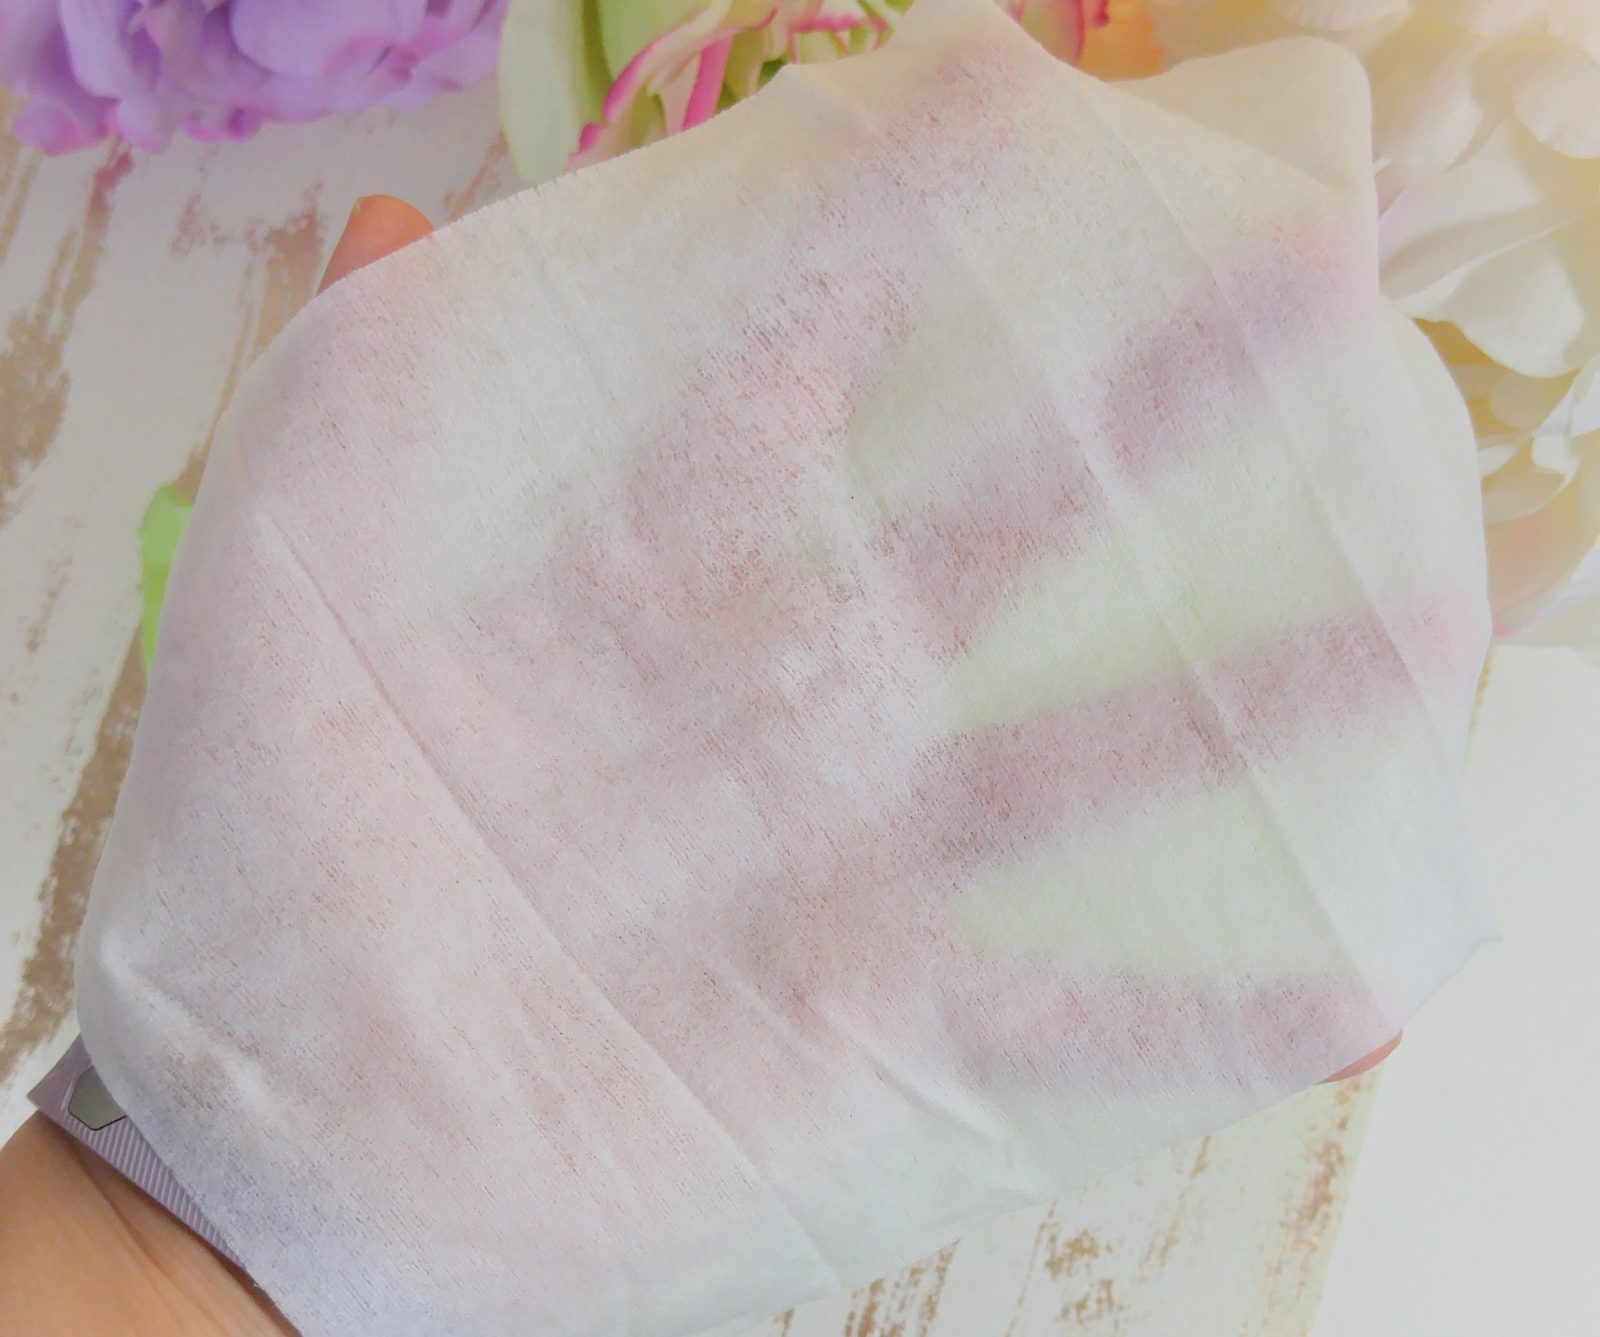 Pixi Beauty Cleansing Cloth Review